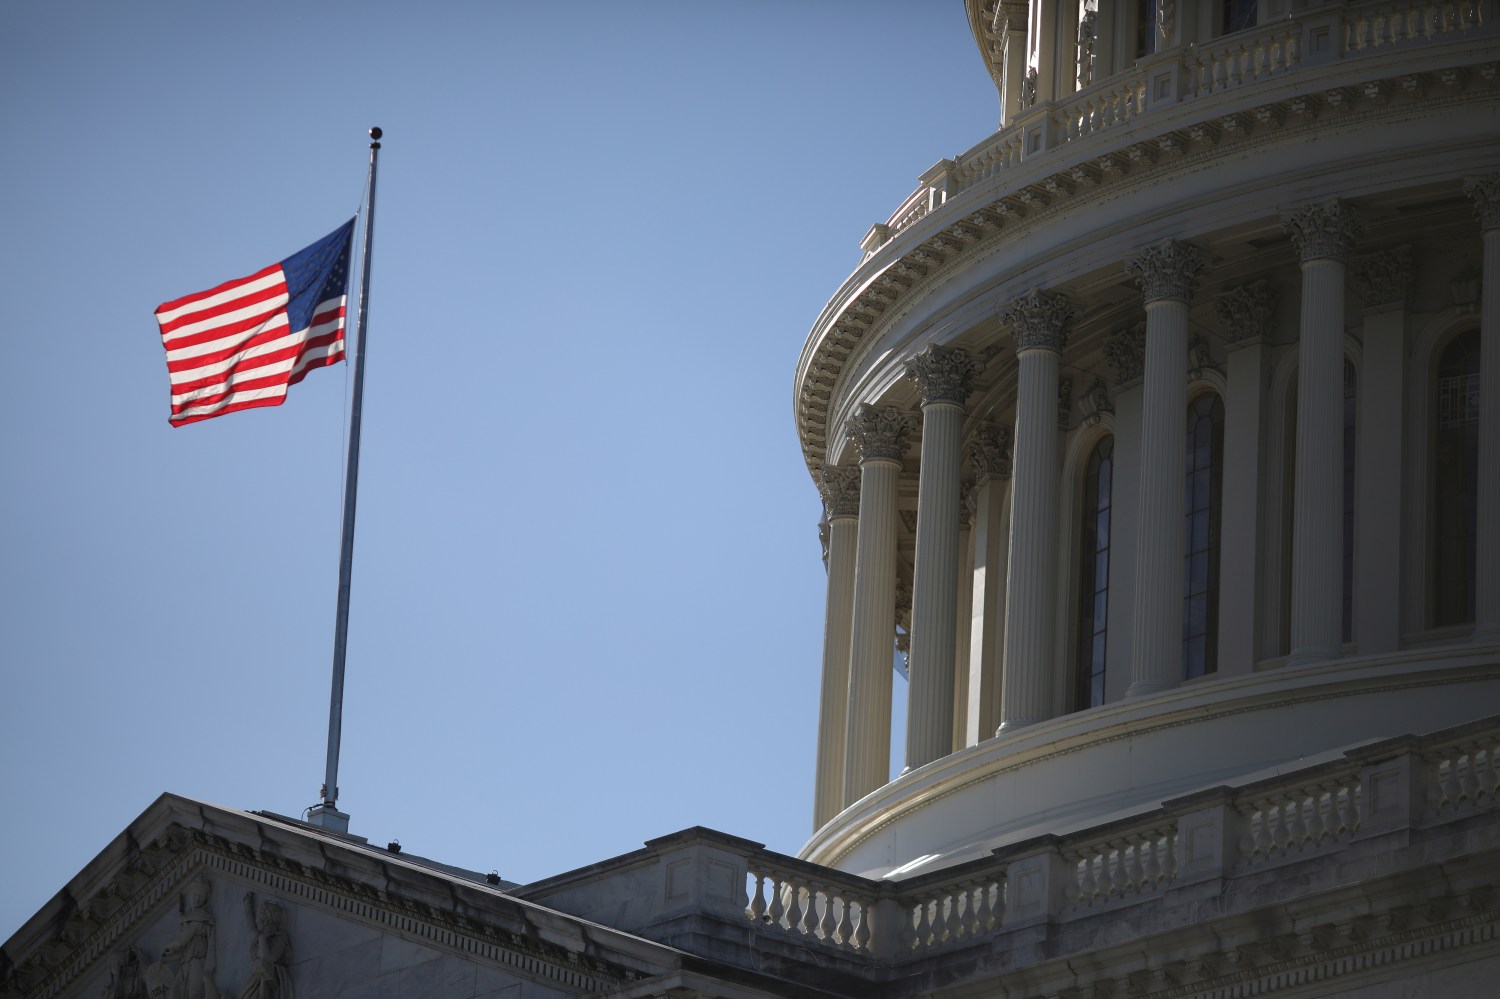 The American Flag flies at the U.S. Capitol in Washington, U.S., December 17, 2020. REUTERS/Tom Brenner